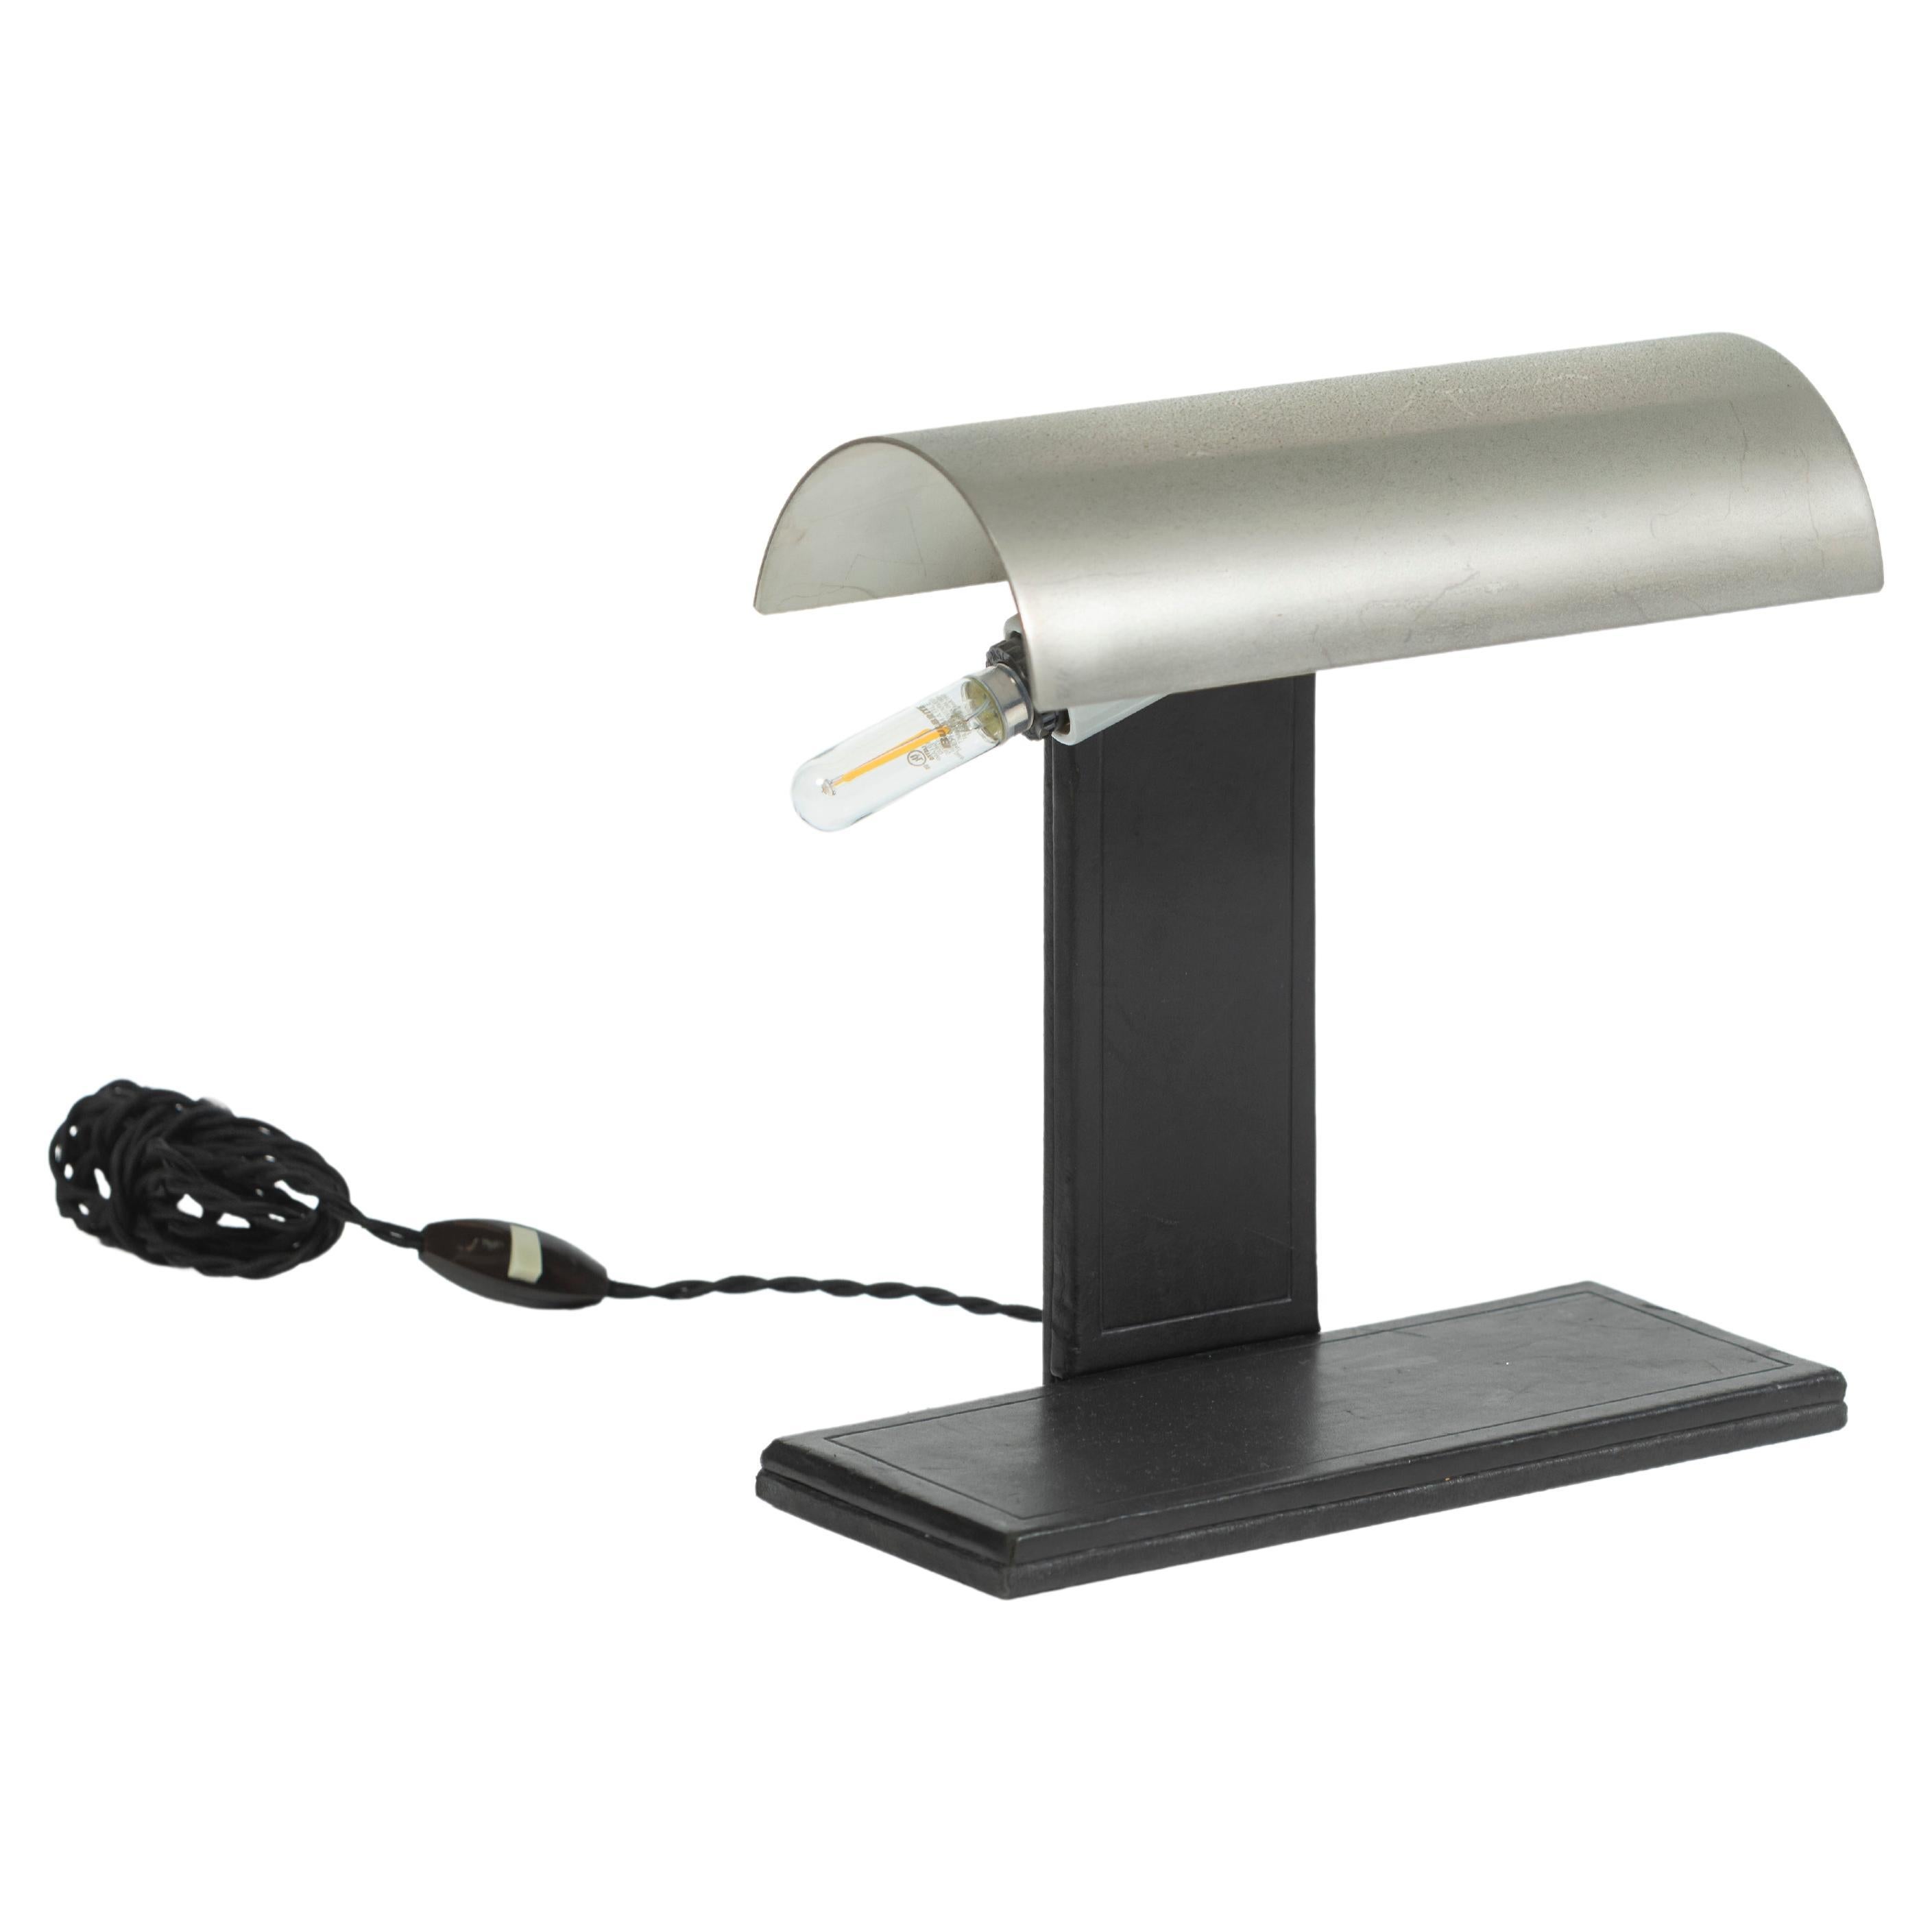 Highly collectible Art Moderne table lamp by Jacques Adnet, with neck nd base entirely wrapped in dark leather with a chrome shade. The fixture holds a pair of horizontal bulbs and is turned on/off on the cord. Great streamlined design for a desk or